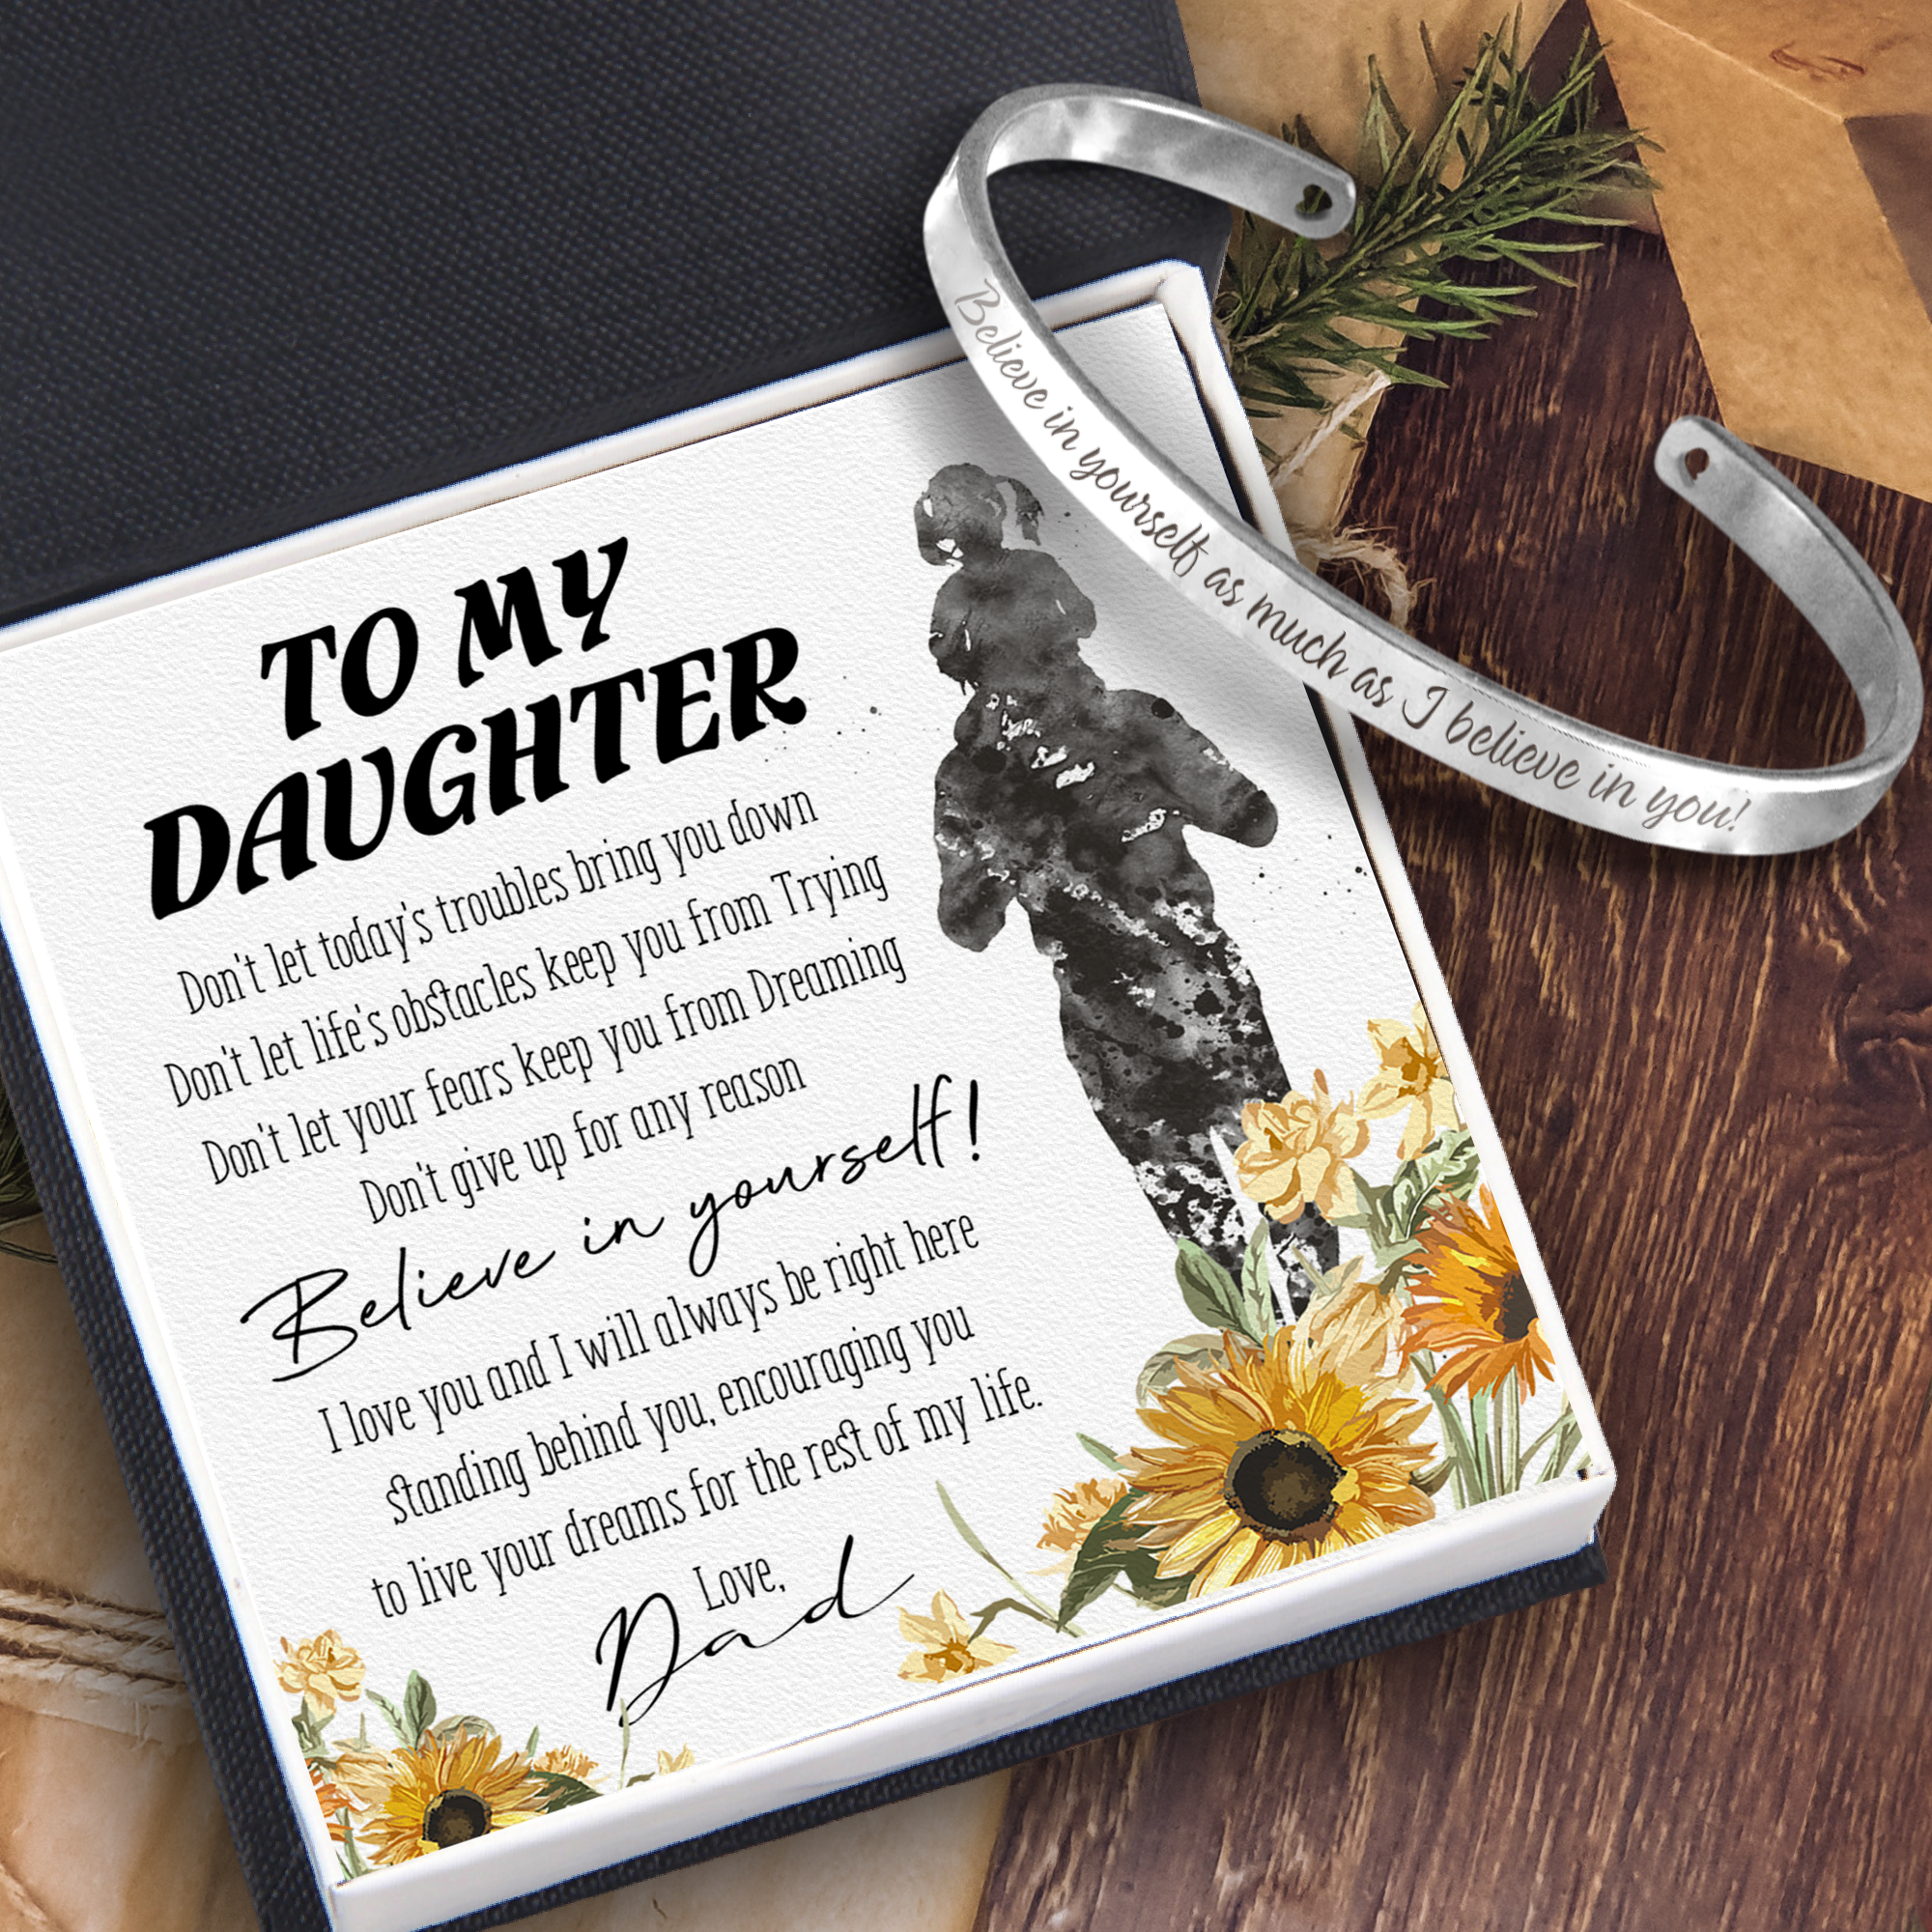 Daughter's Bracelet - Family - To My Daughter - Believe In Yourself - Ukgbzf17019